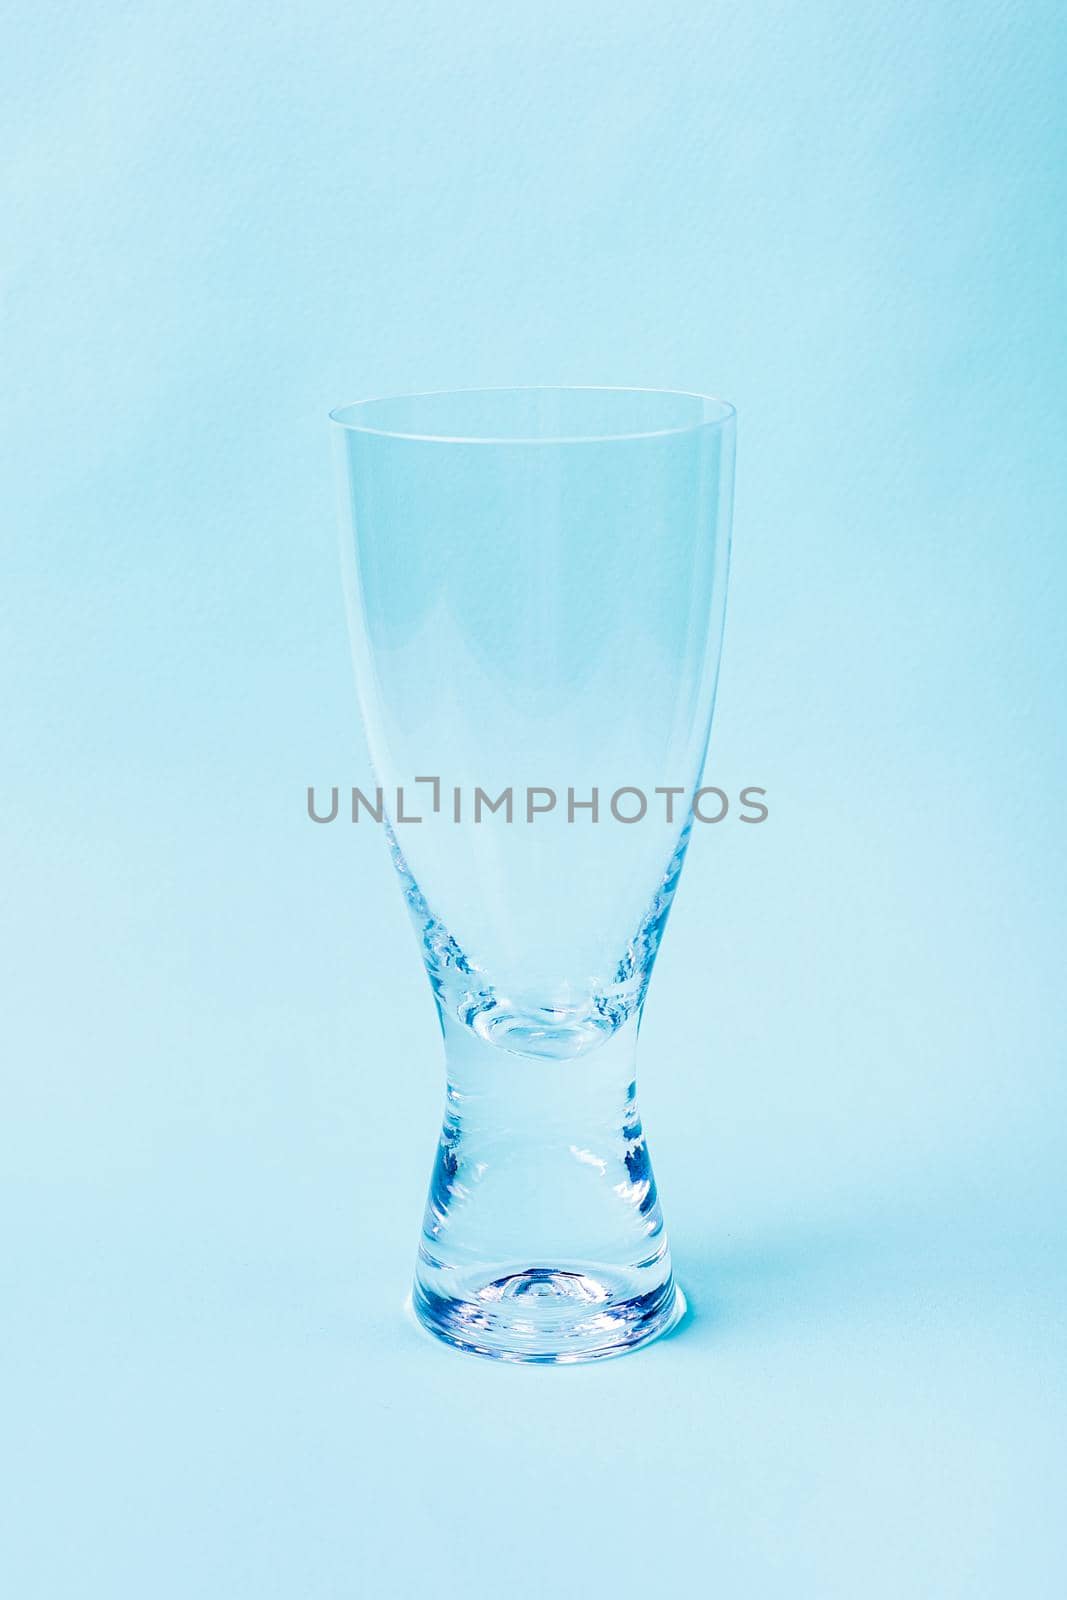 Empty glass from transparent glass on a blue background. For drinking, thirst quenching, kitchen utensils, dishes.